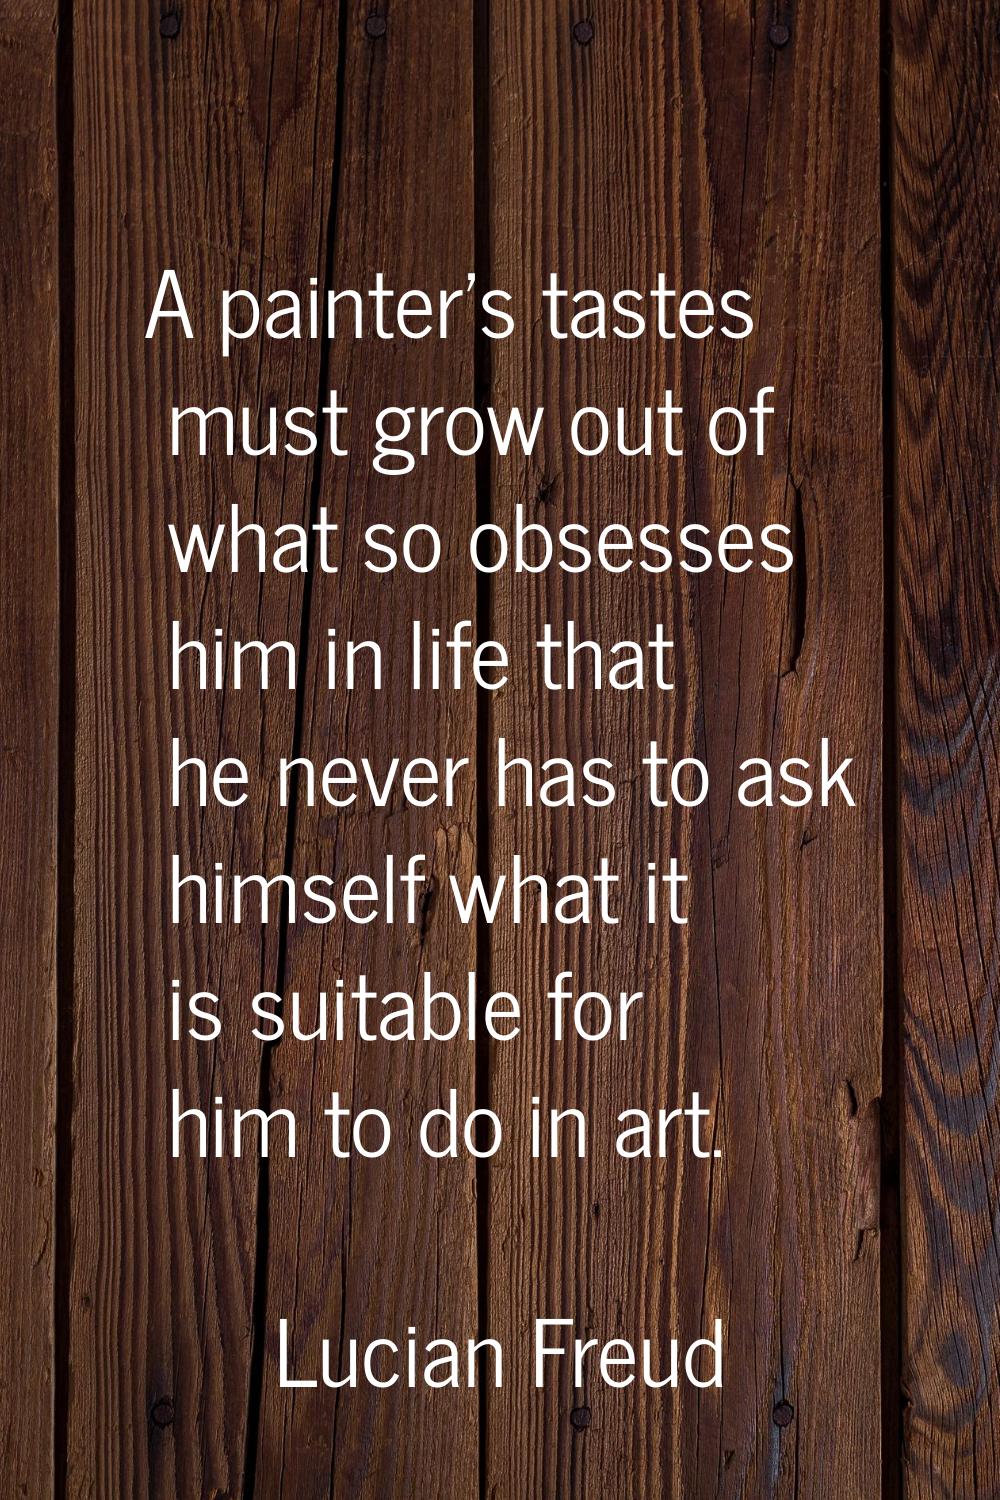 A painter's tastes must grow out of what so obsesses him in life that he never has to ask himself w